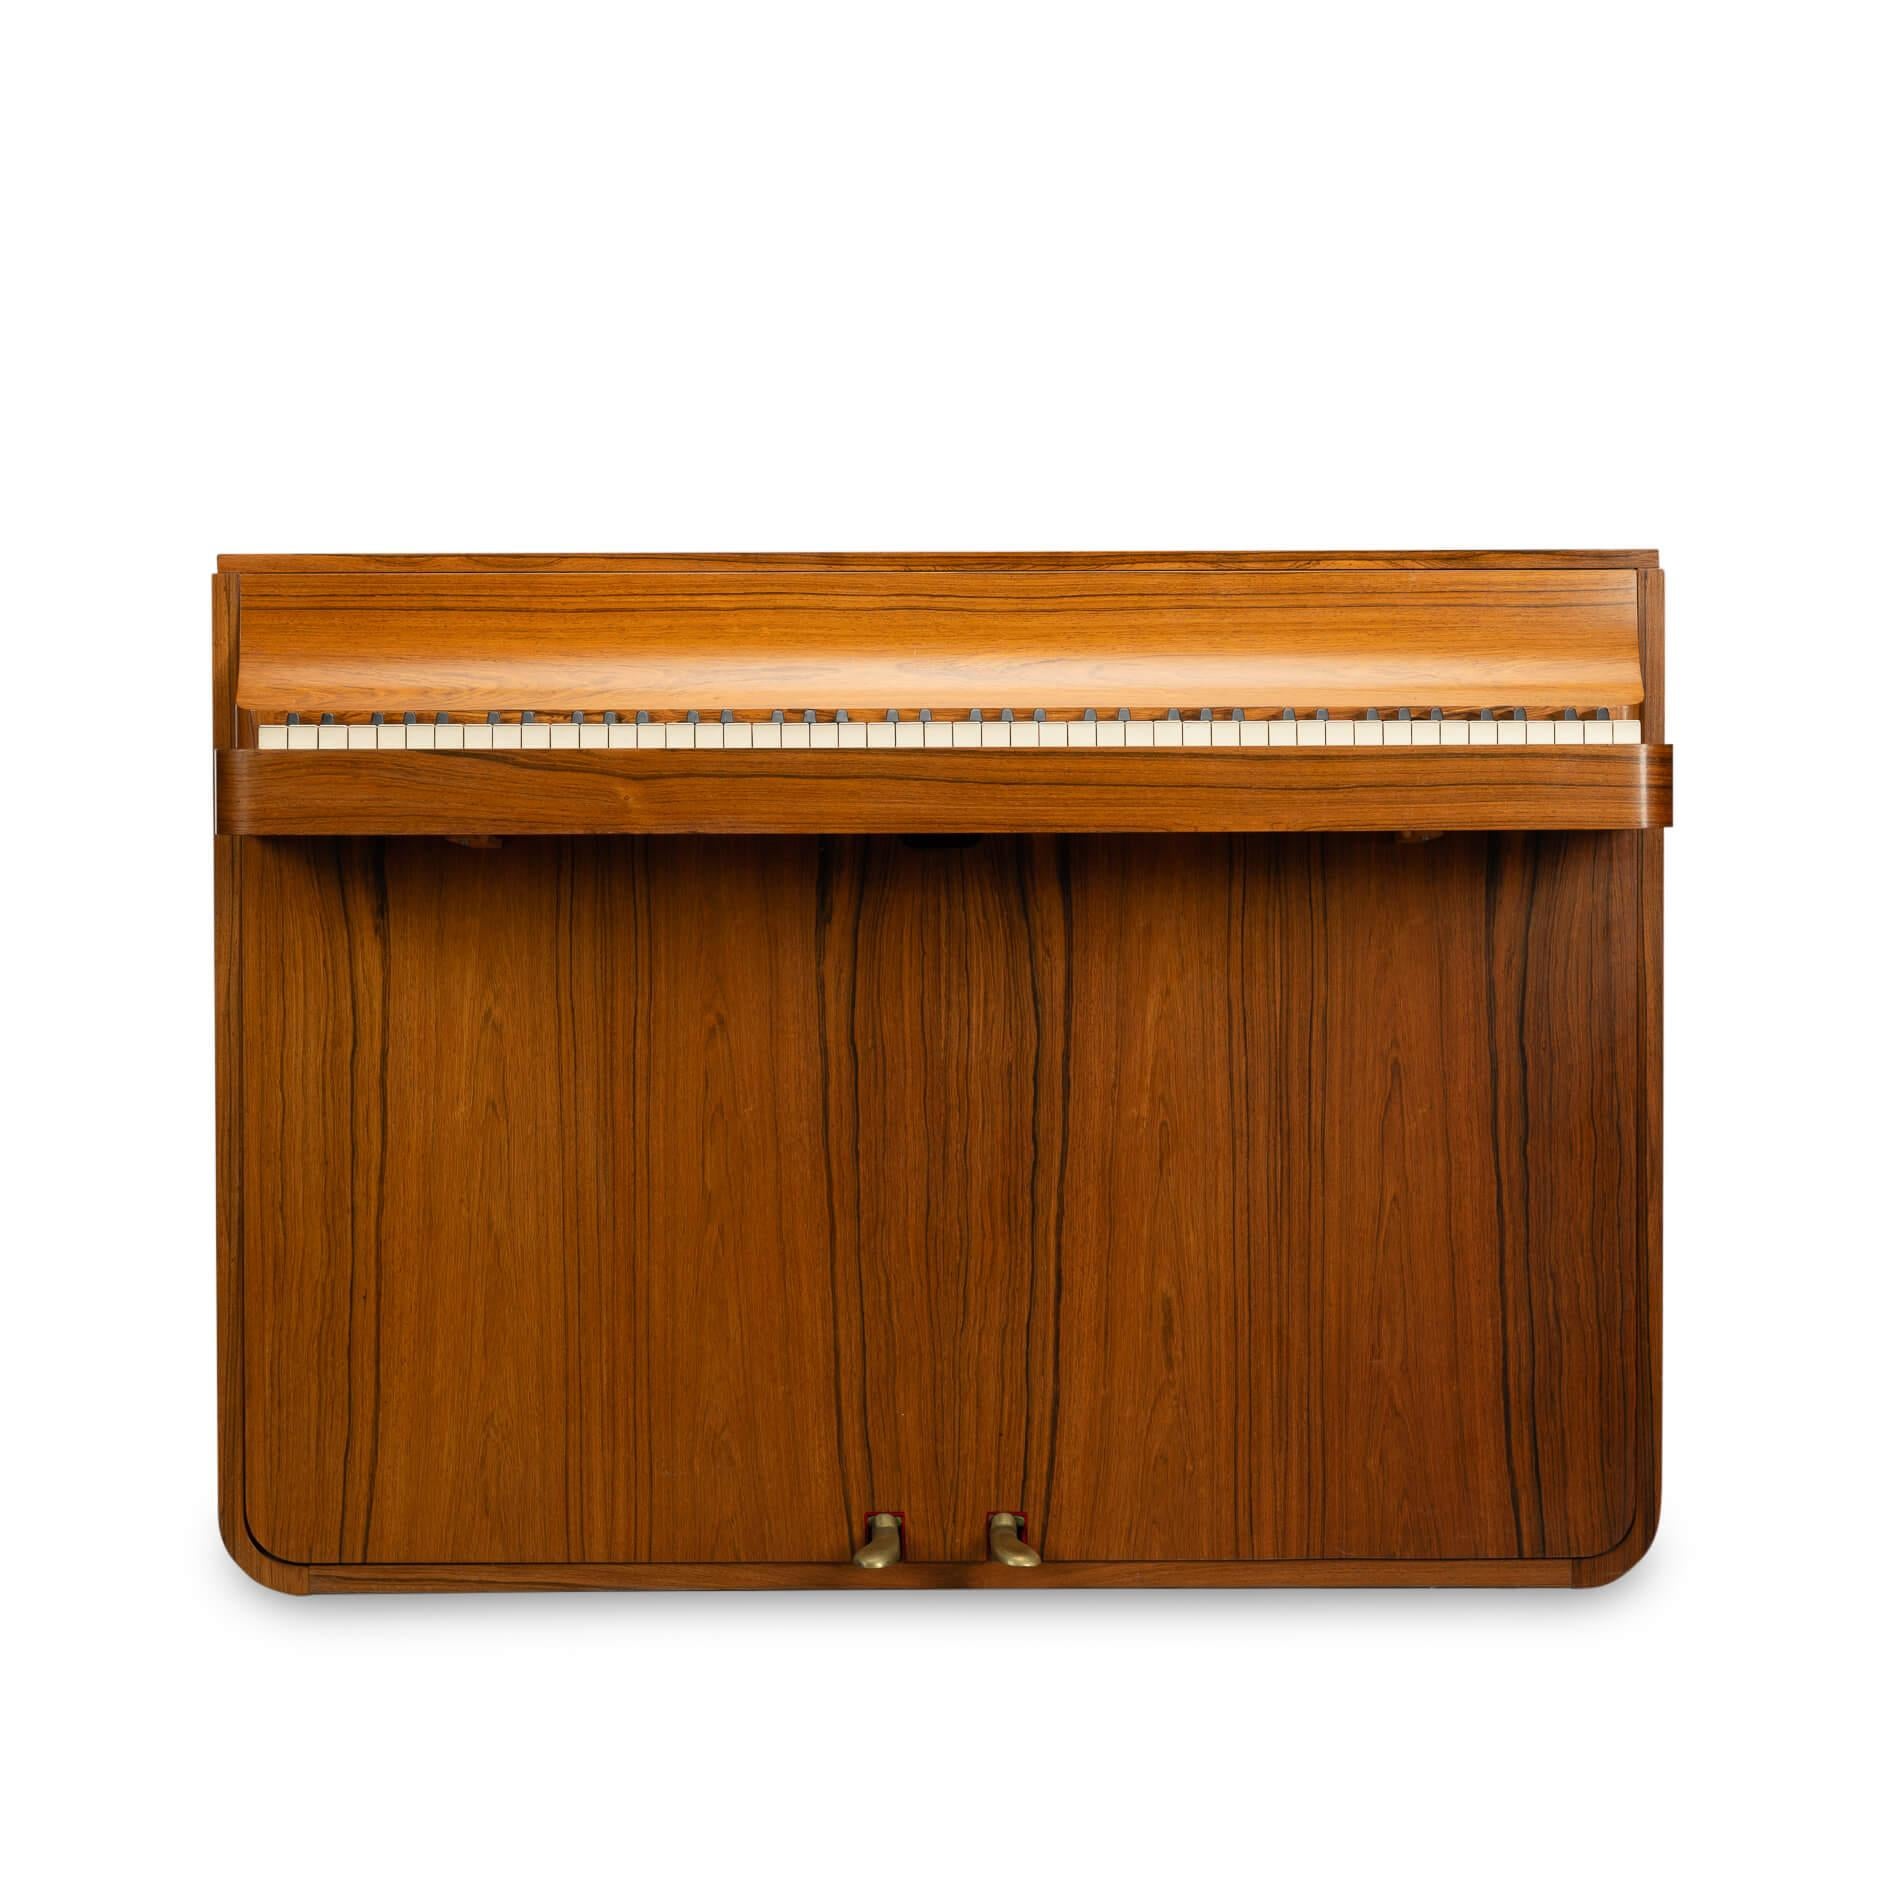 Danish design
A rare Danish midcentury pianette made of magnificent rosewood. It is called pianette due to the 82 keys rather than the standard 88 of a full size piano. This pianette is made by renowned piano maker Louis Zwicki. Every piano from